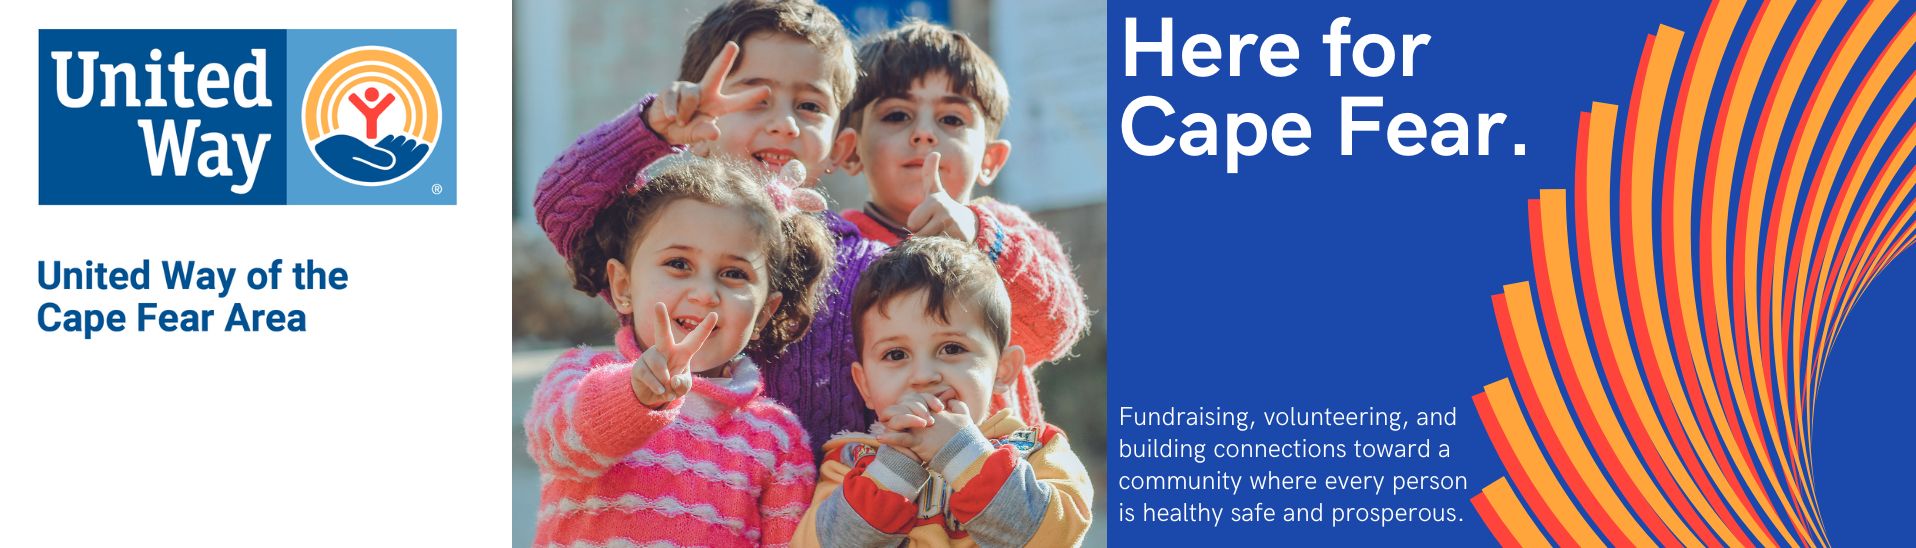 Banner Image with Vision - Fundraising, volunteering, and building connections toward a community where every person is healthy safe and prosperous.